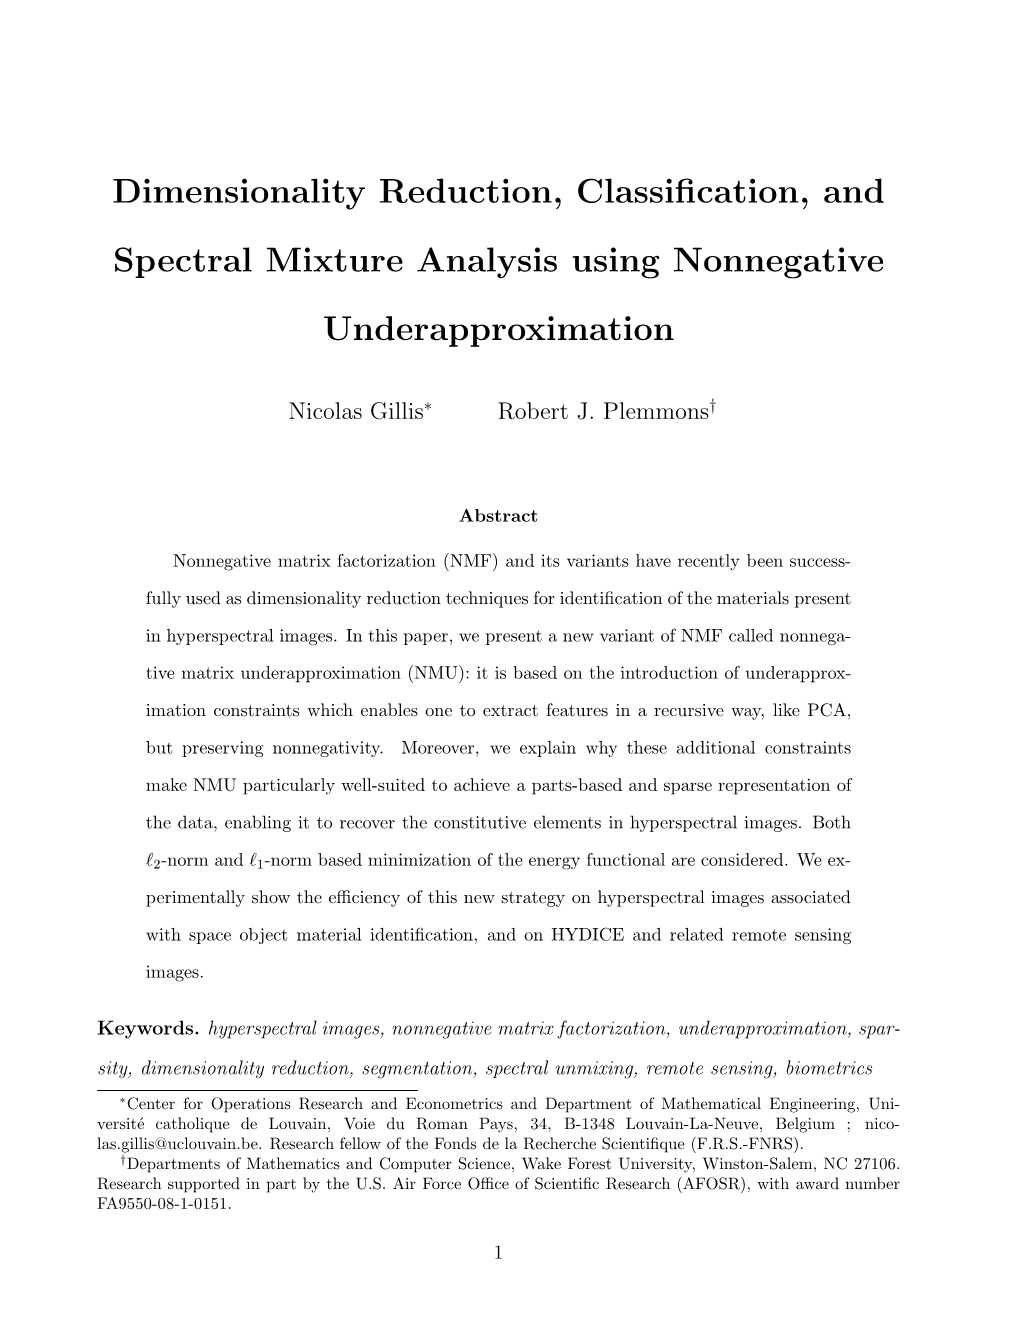 Dimensionality Reduction, Classification, and Spectral Mixture